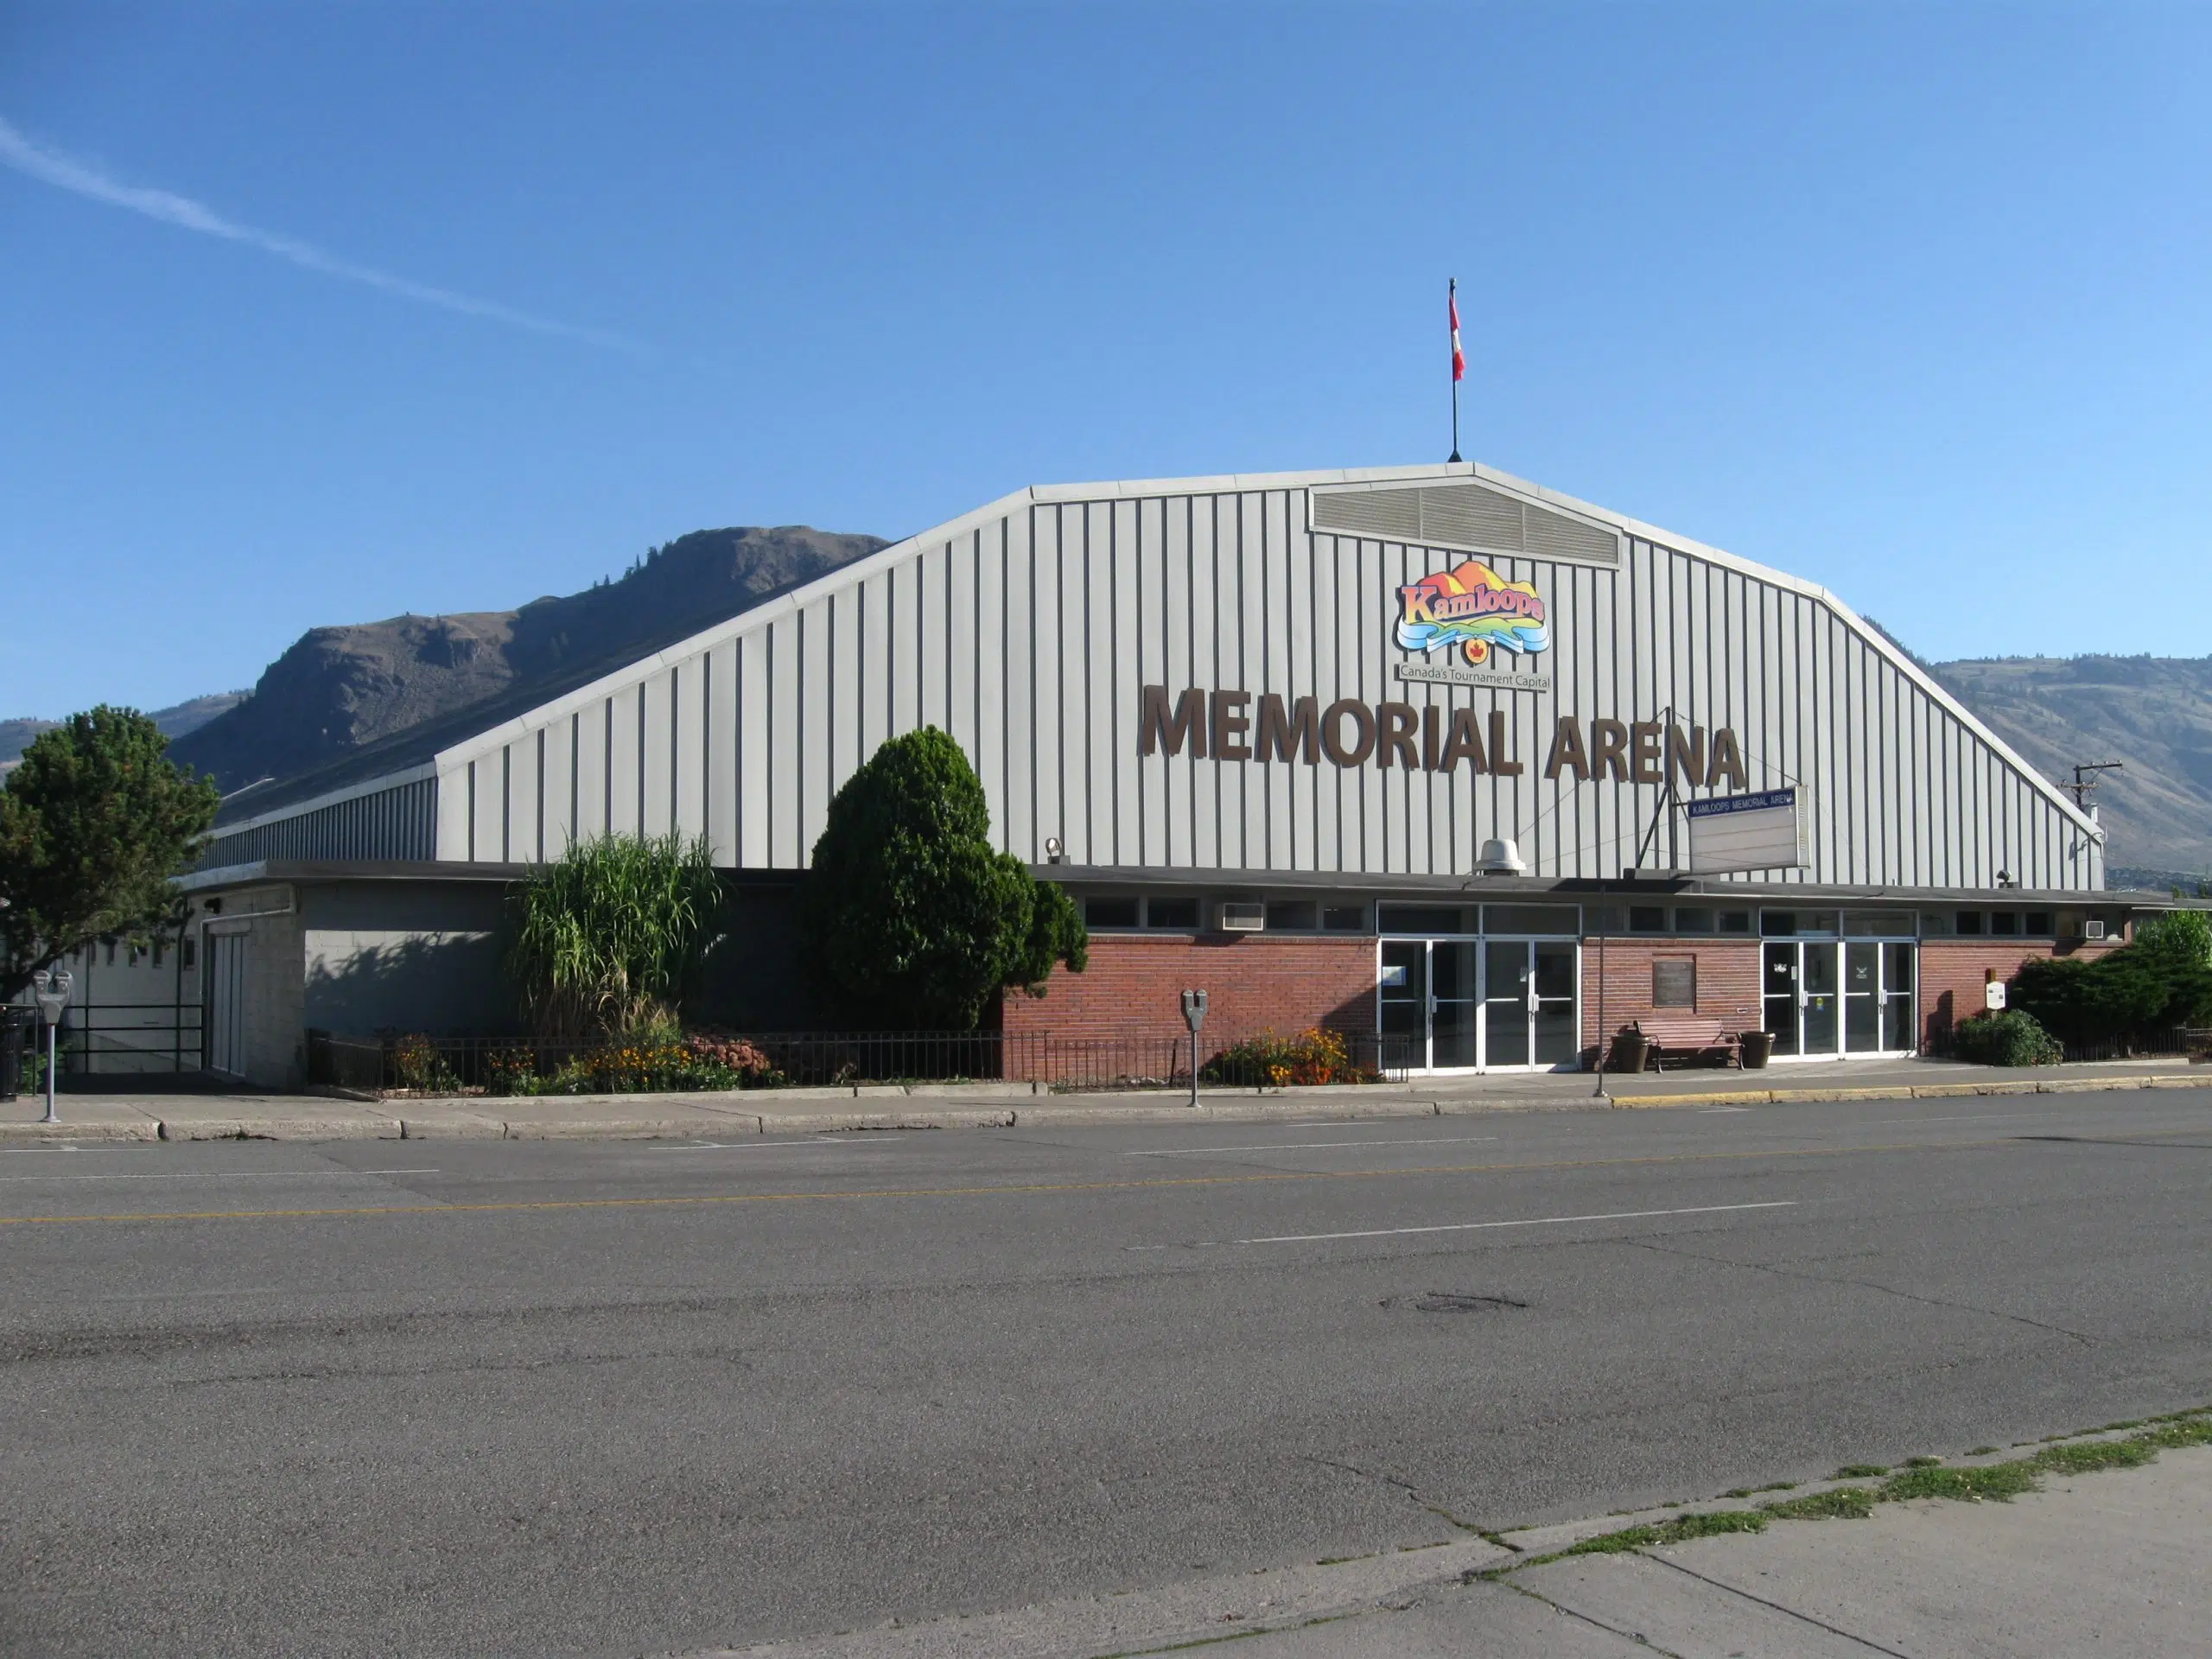 Many Kamloops ice users upset with Memorial Arena being used as a homeless shelter